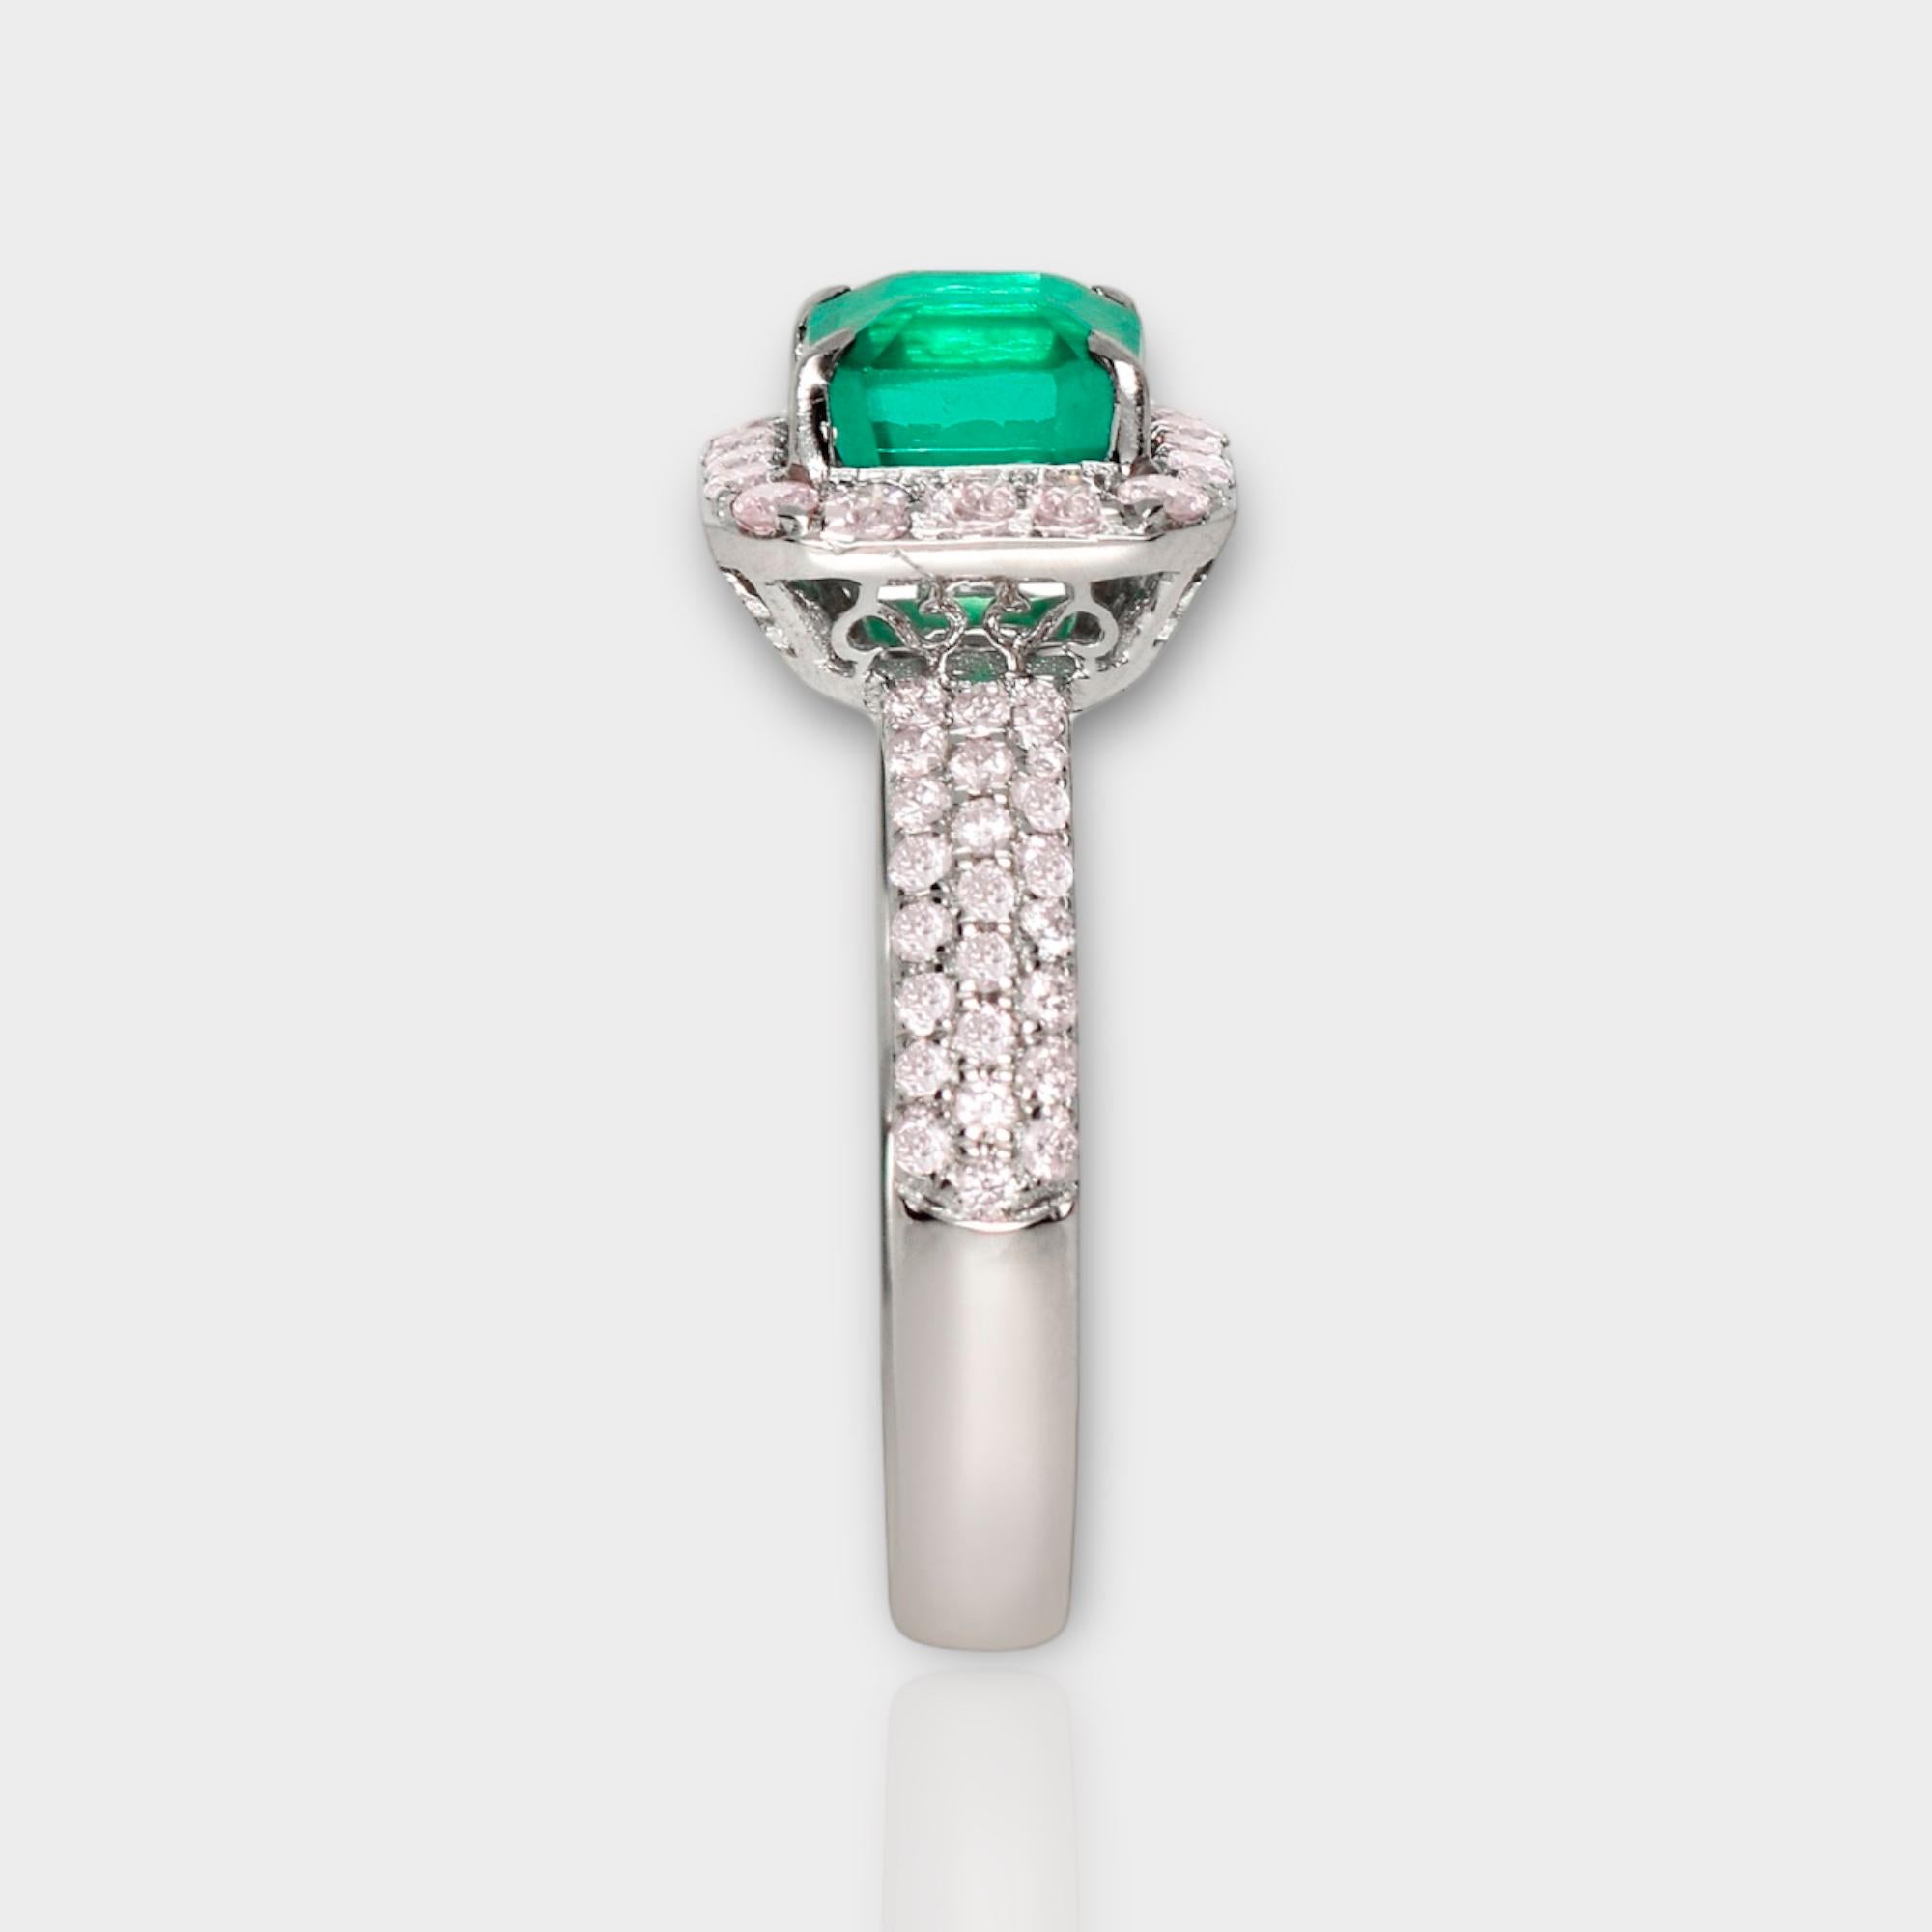 IGI 18K 1.25 ct Natural Green Emerald&Pink Diamond Art Deco Engagement Ring In New Condition For Sale In Kaohsiung City, TW